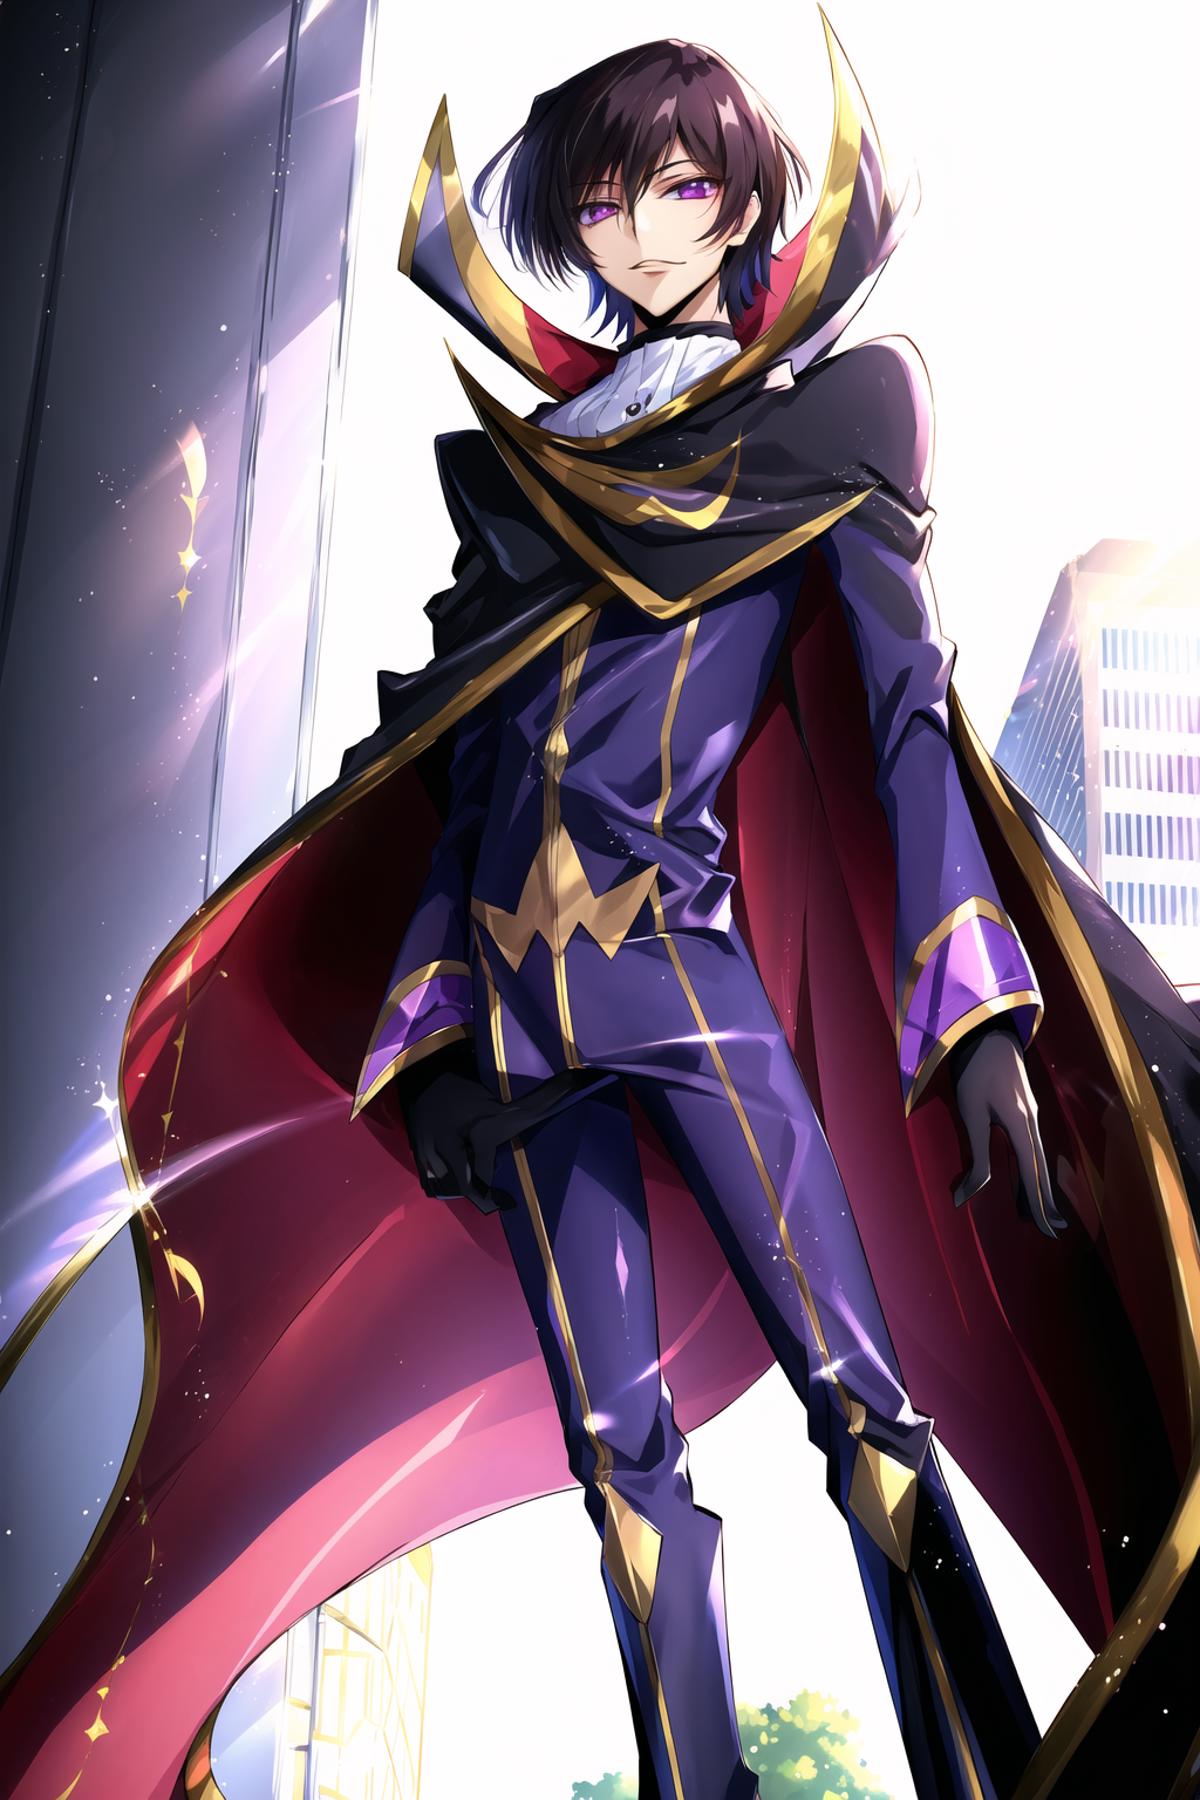 Tsumasaky] Lelouch Lamperouge - Code Geass - V1, Stable Diffusion LoRA